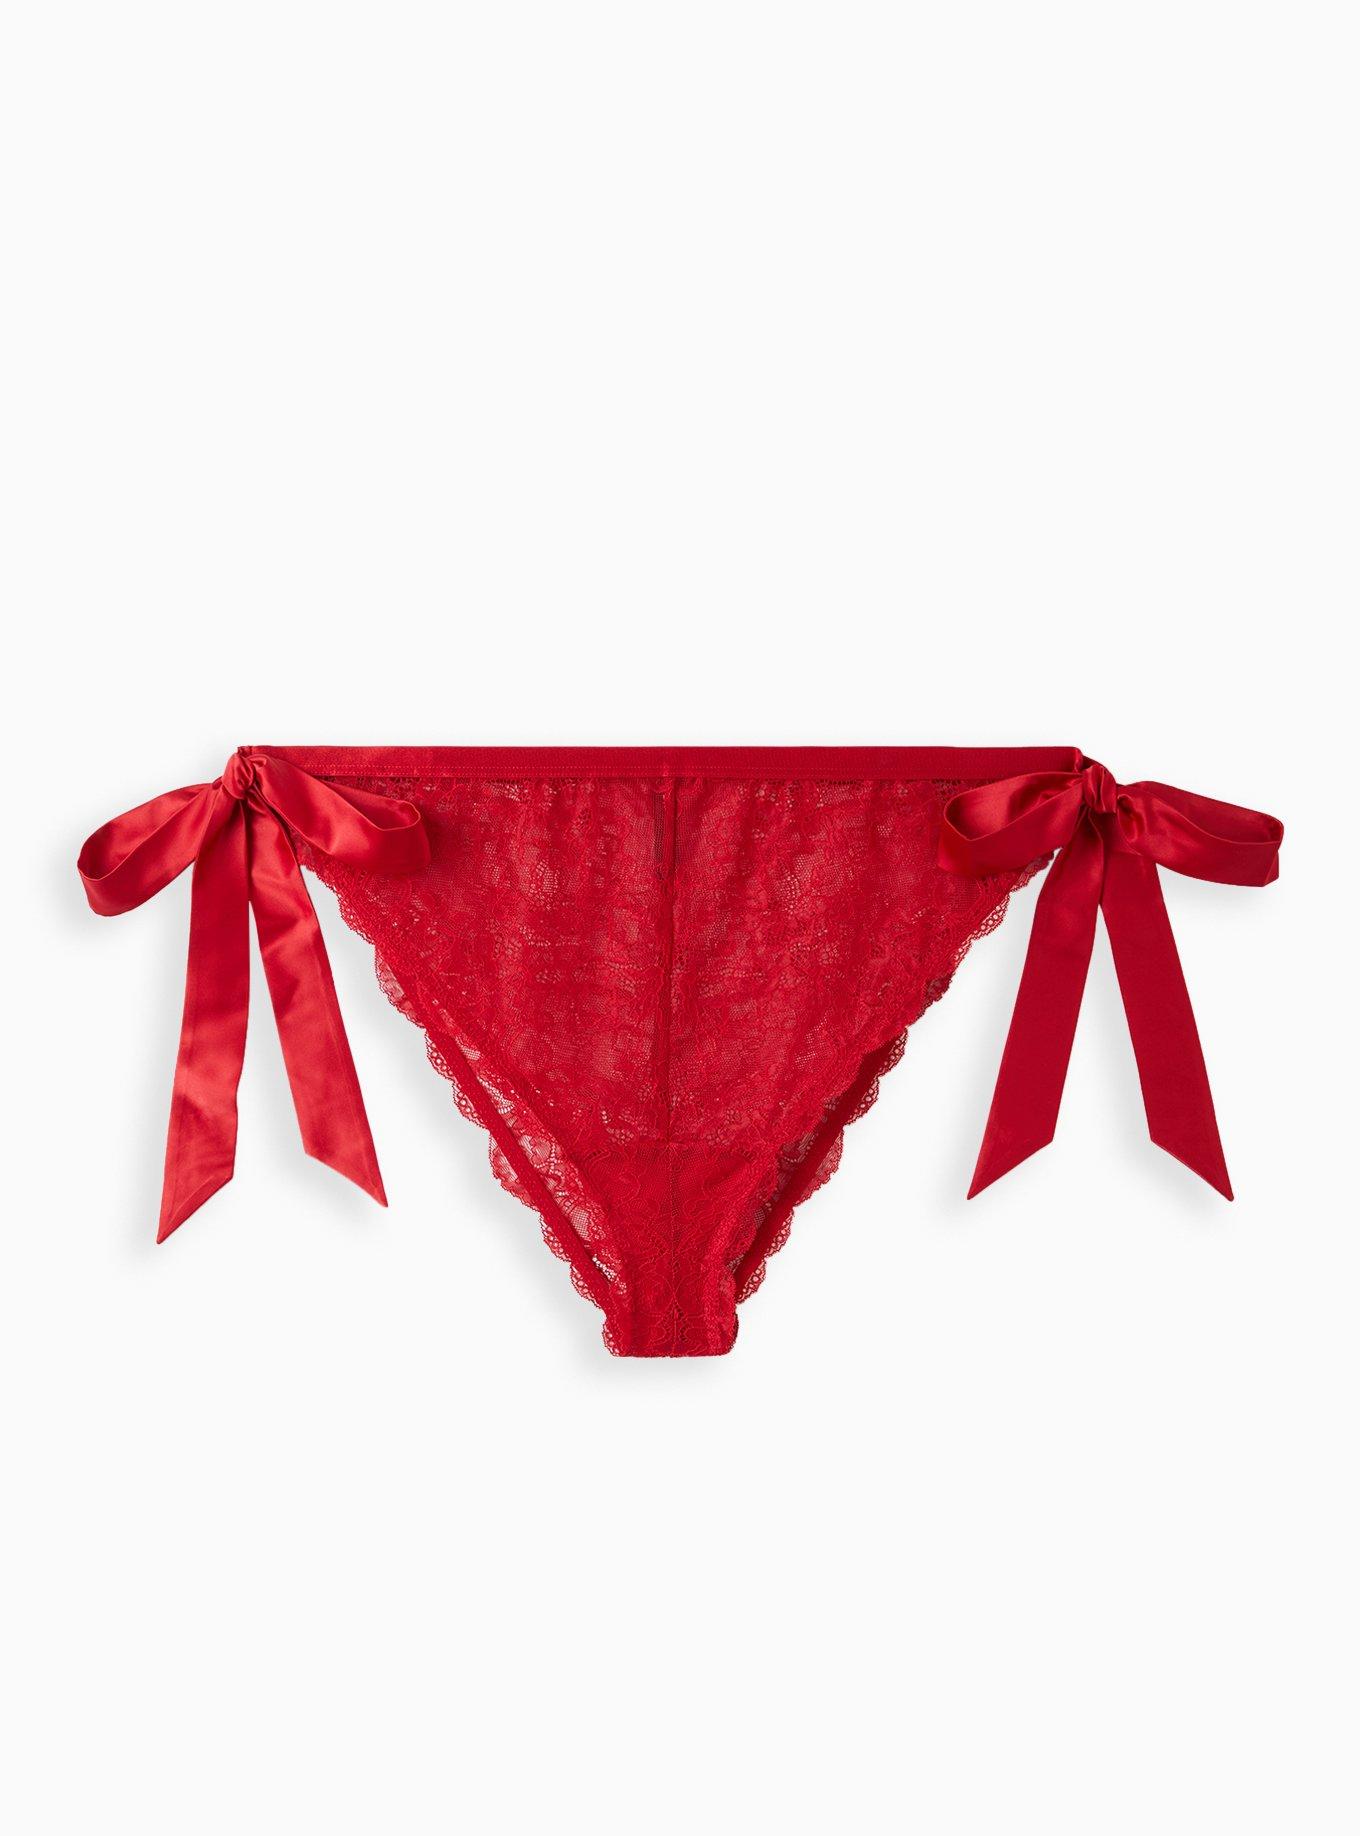 Ribbed Thong with Lace Waistband - tiVOGLIO